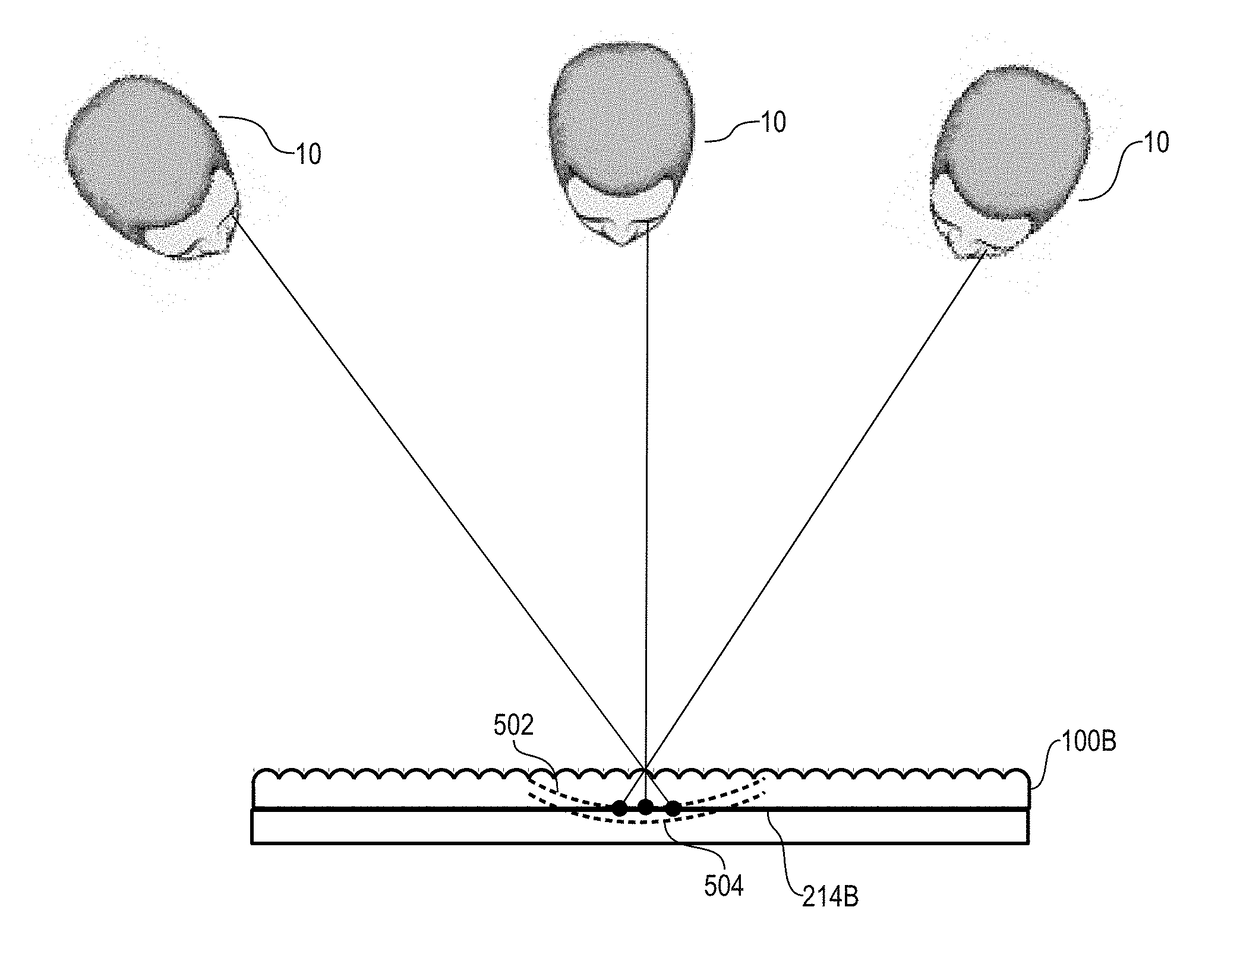 Resolution For Autostereoscopic Video Displays